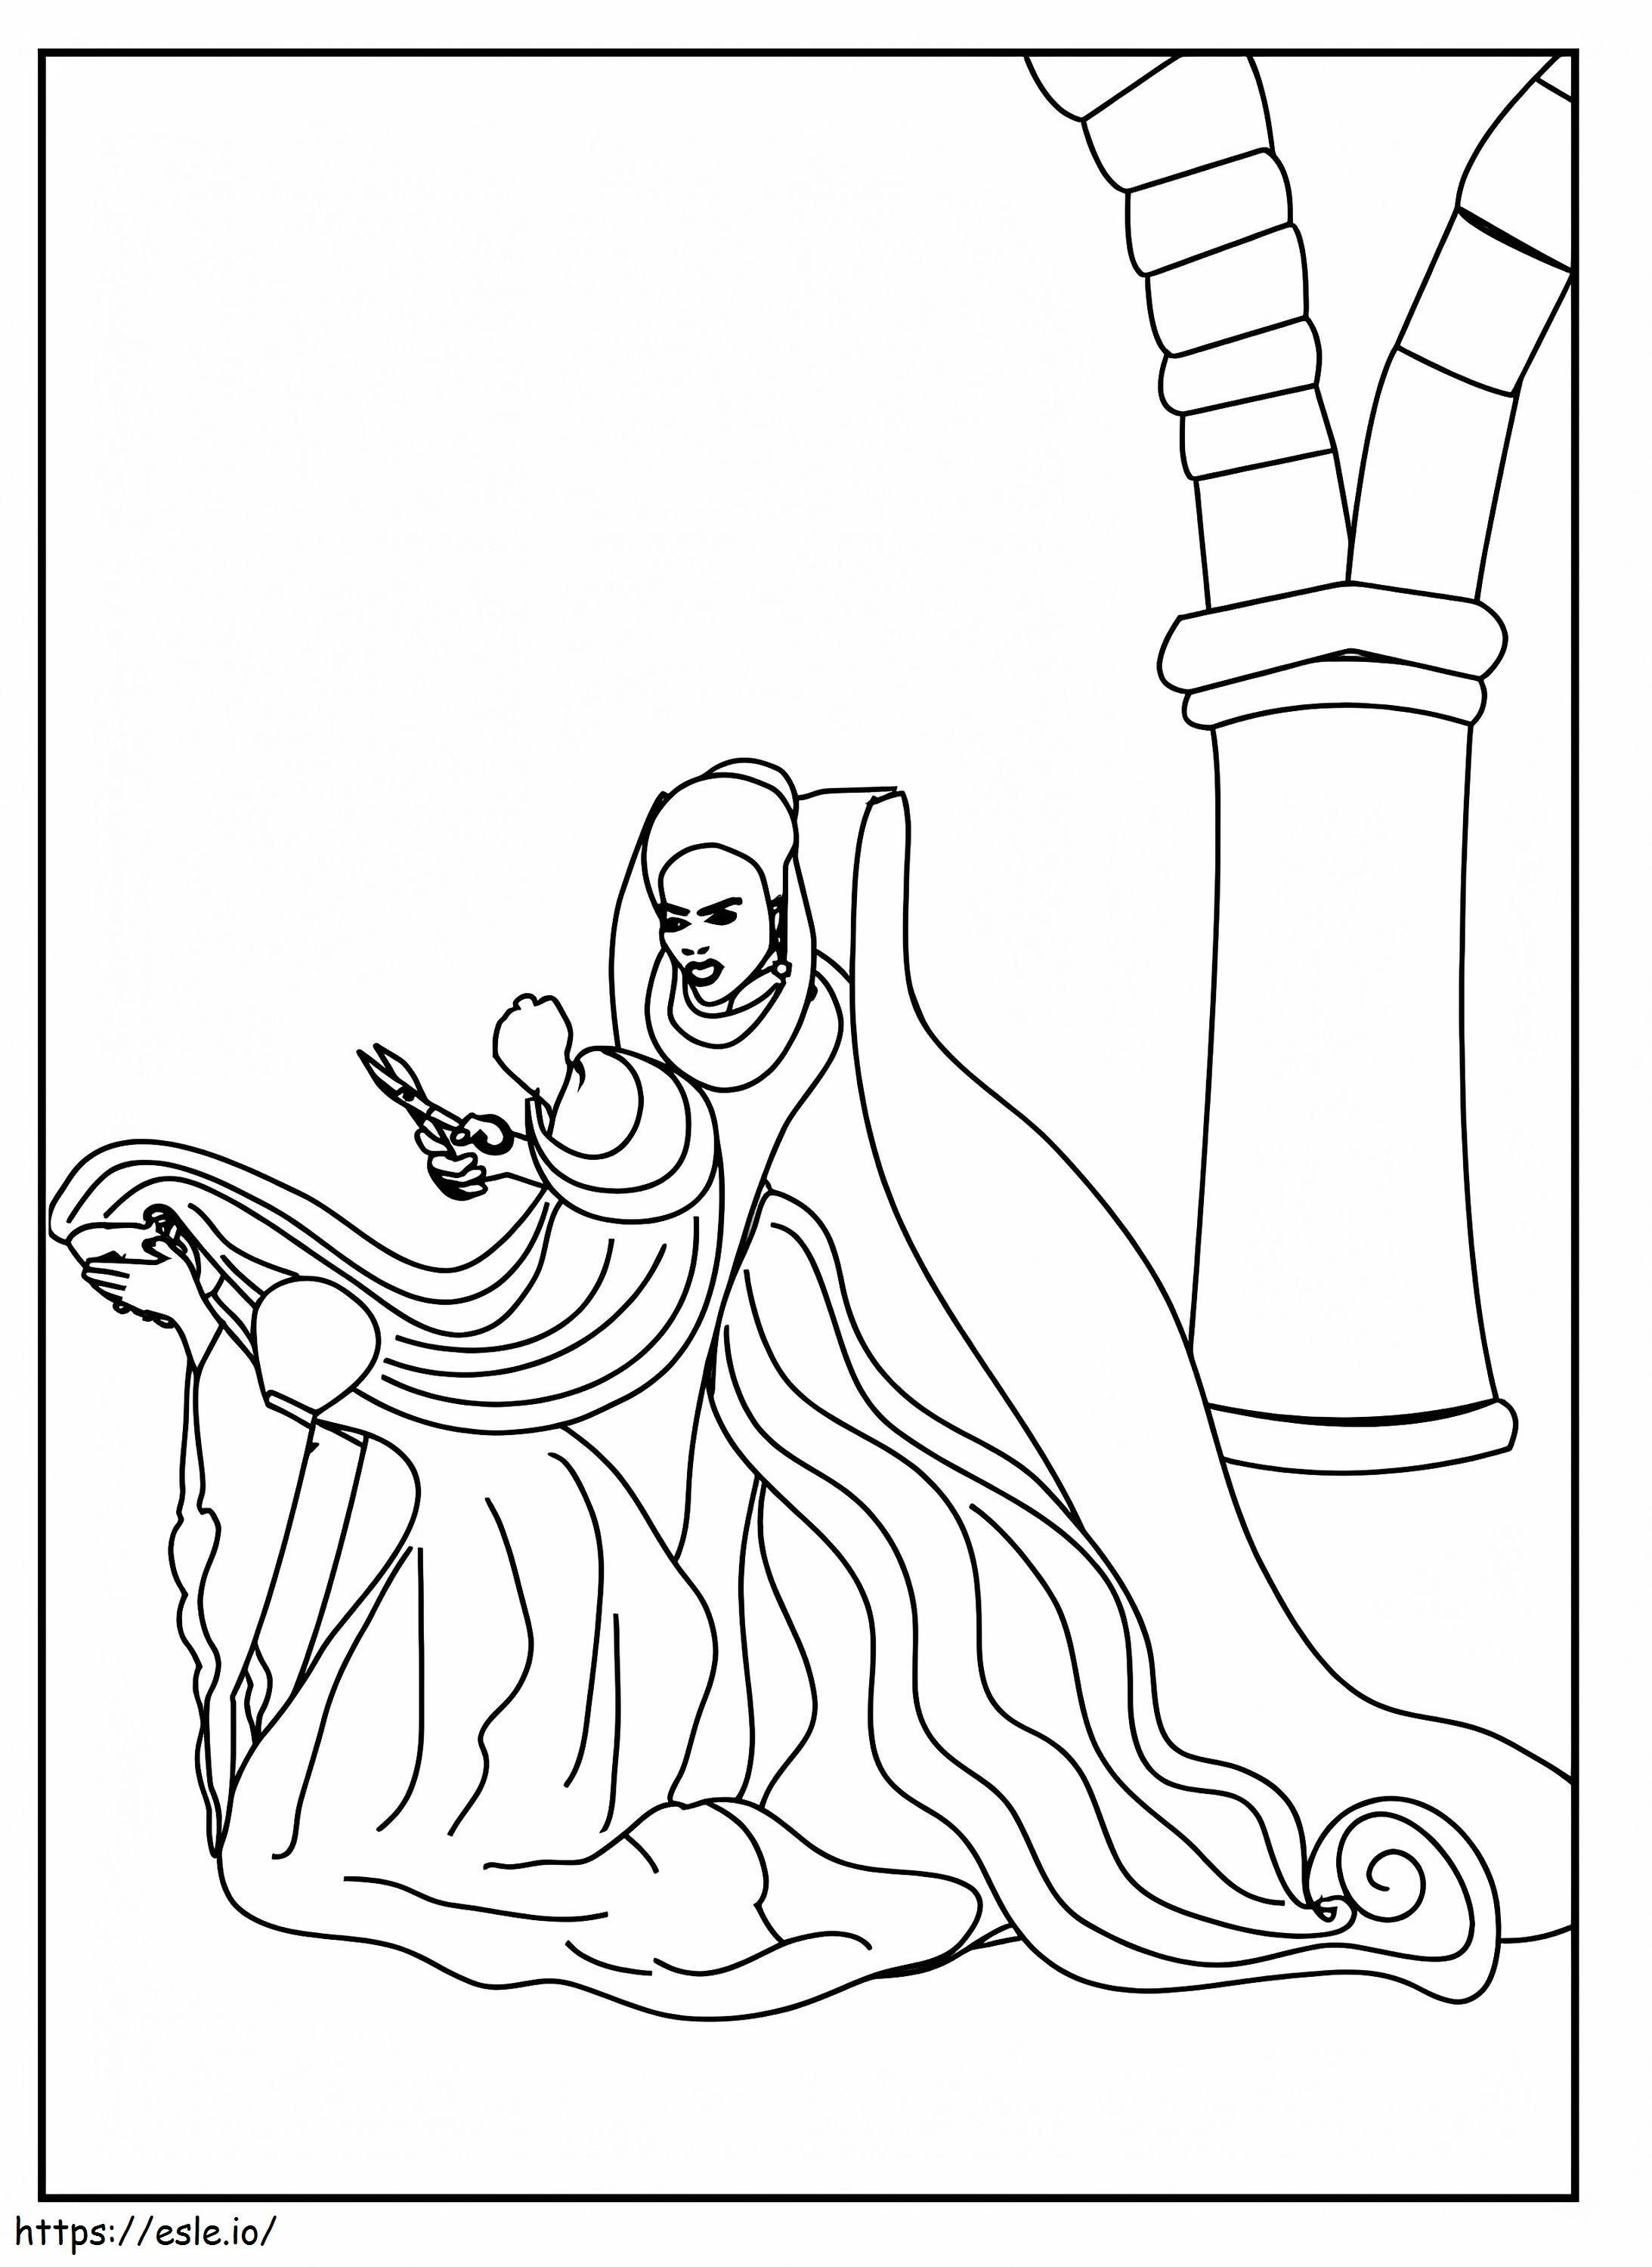 Rapunzel Has A Witch'S Haircut coloring page